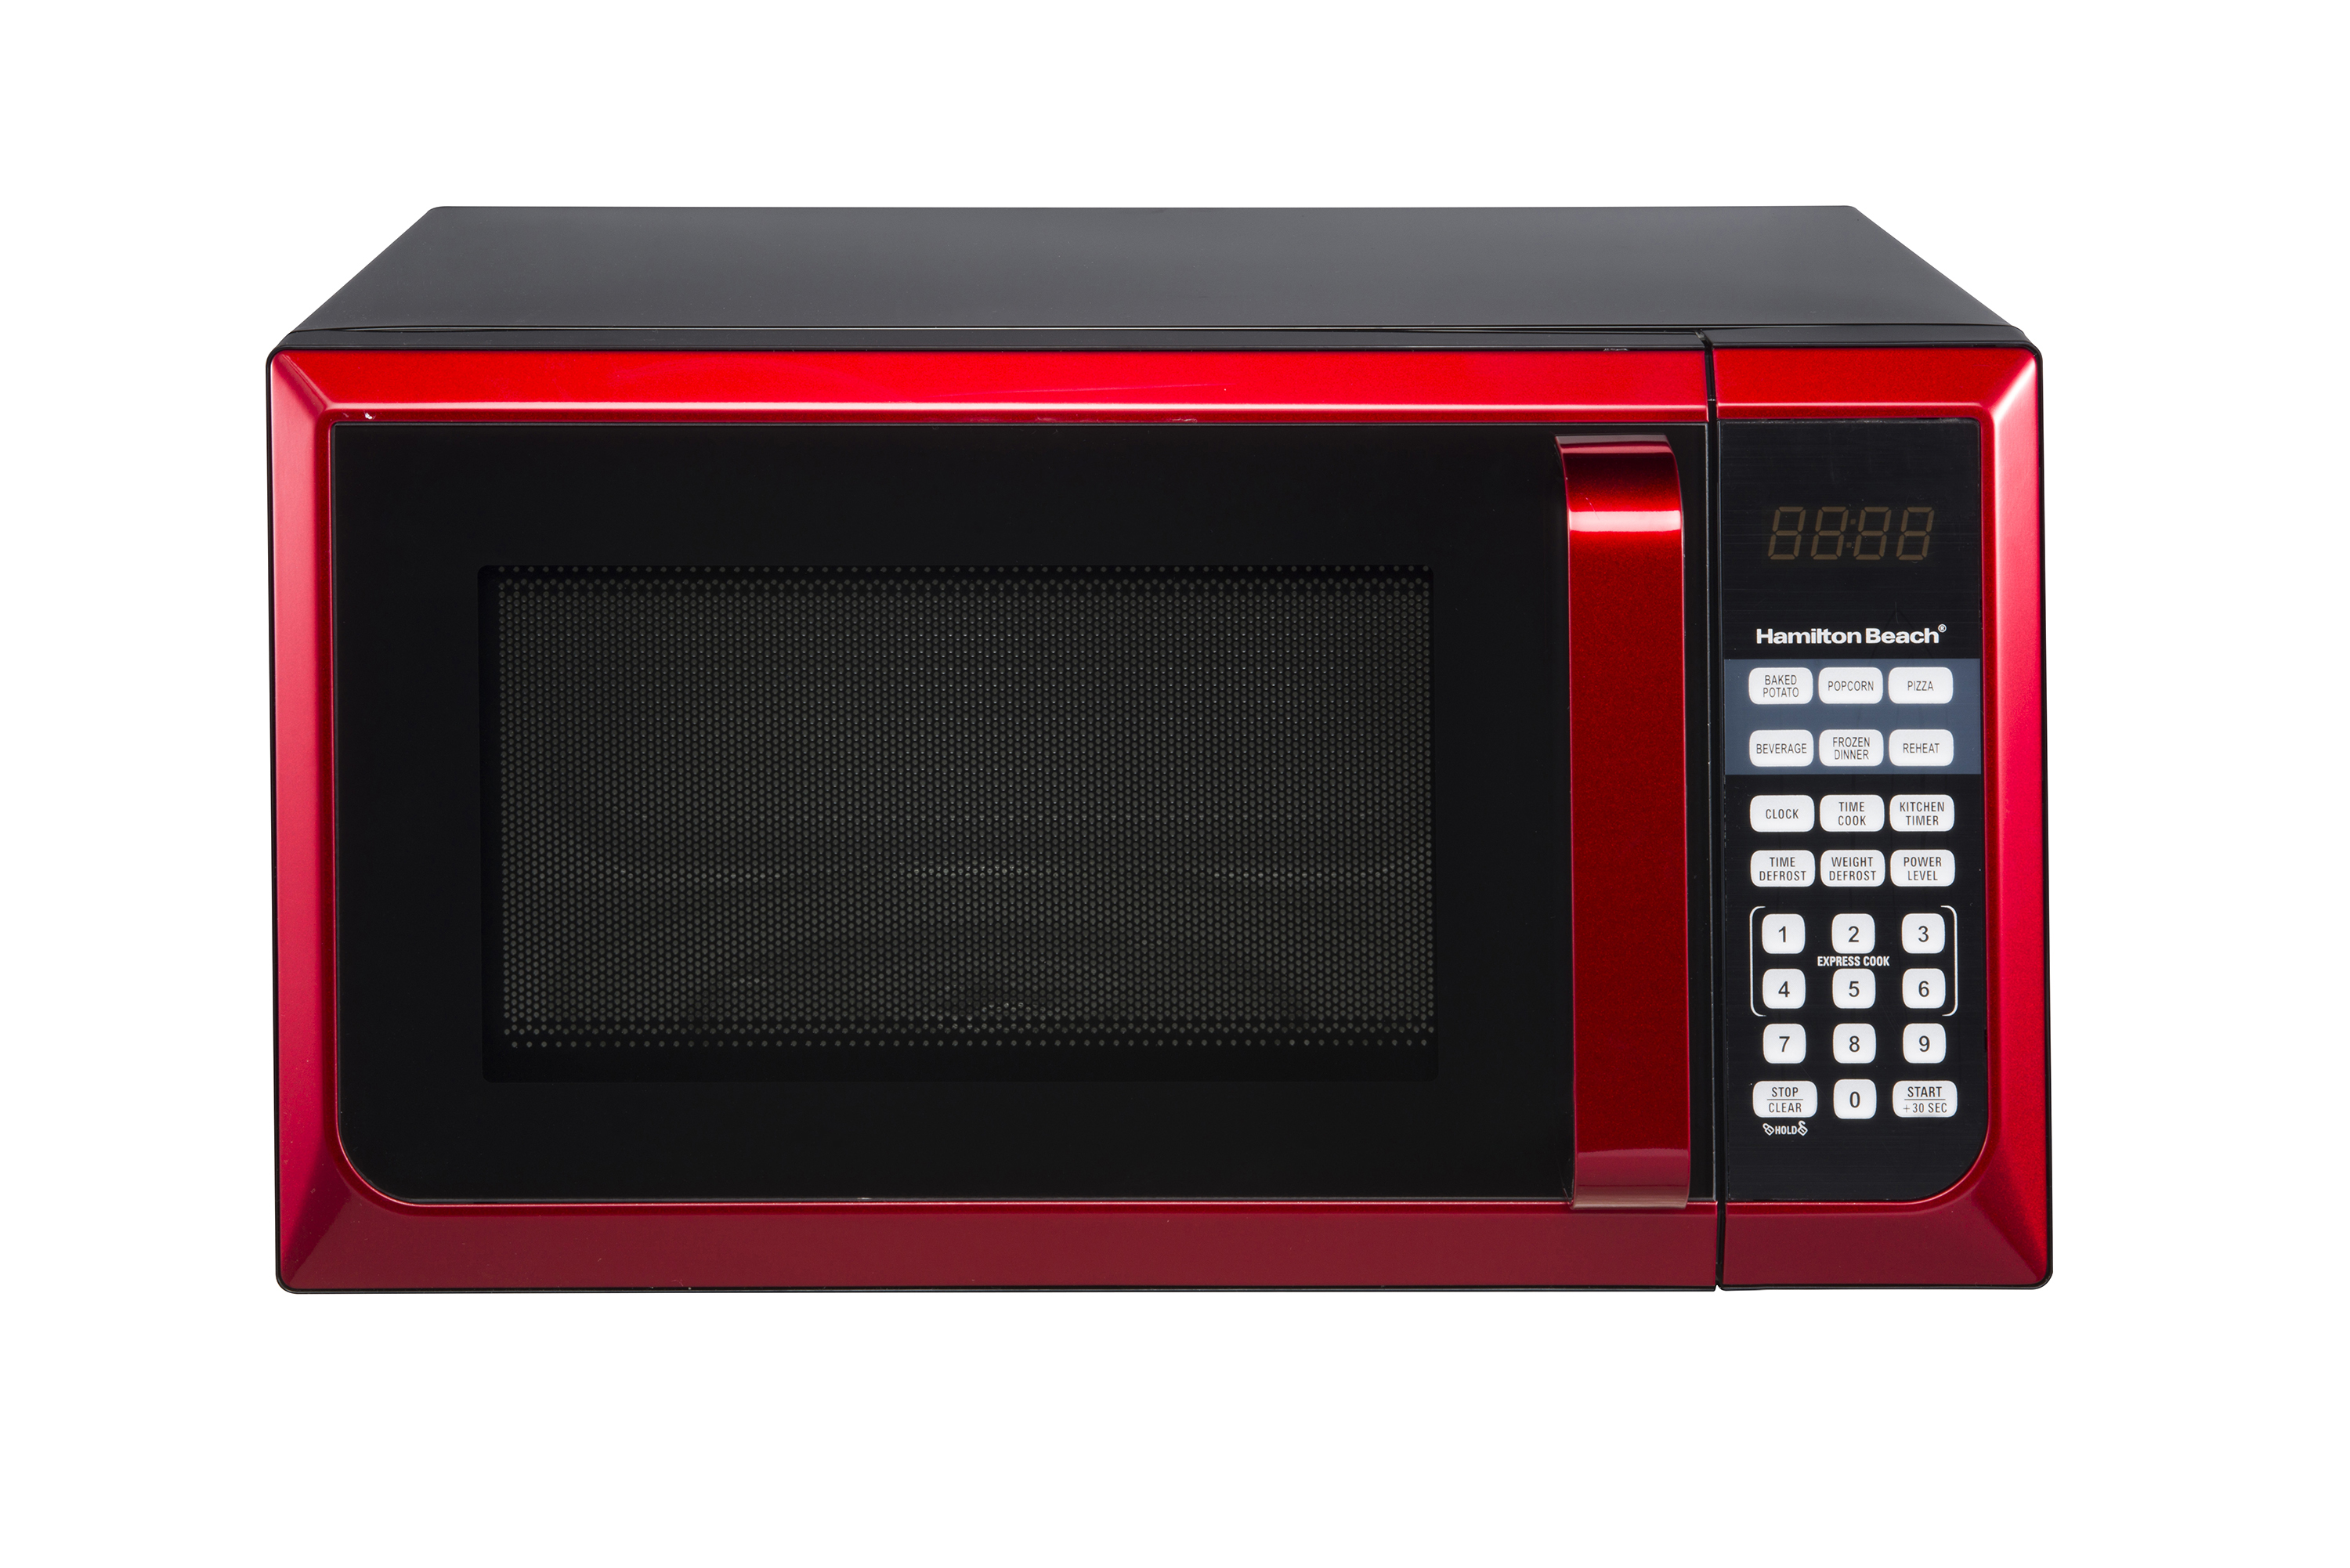 Hamilton Beach 0.9 cu. ft. Countertop Microwave Oven, 900 Watts, Red Stainless Steel - image 1 of 7